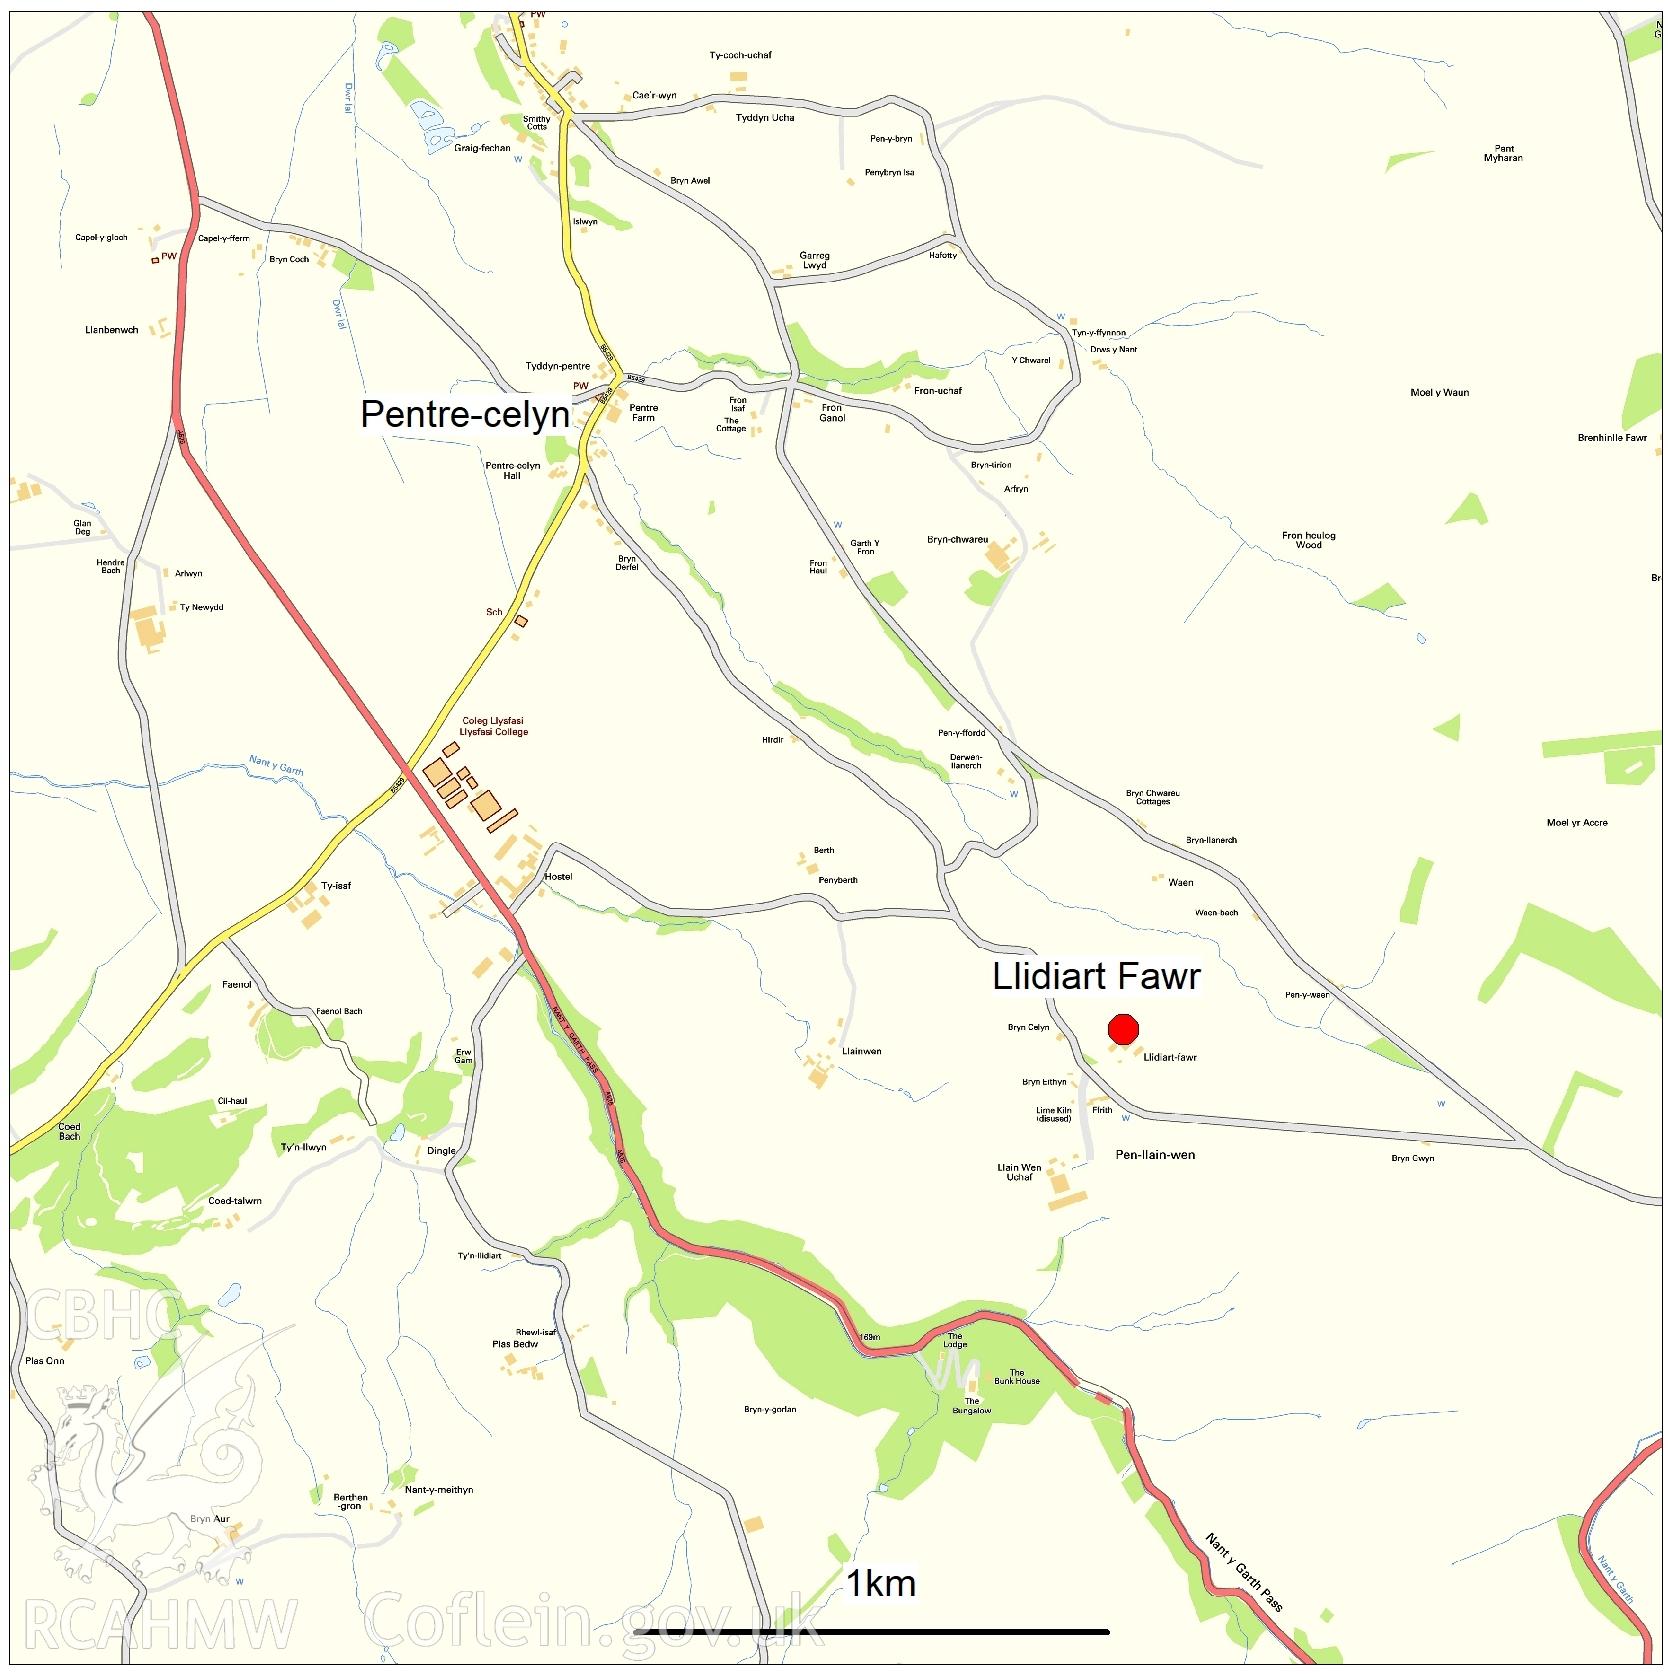 Modern map of area around Llidiart Fawr, Denbighshire. Used as report illustration for CPAT Project 2350: Llidiart Fawr, Pentrecelyn, Ruthin - Archaeological Building Survey, 2018. Report no. 1644.